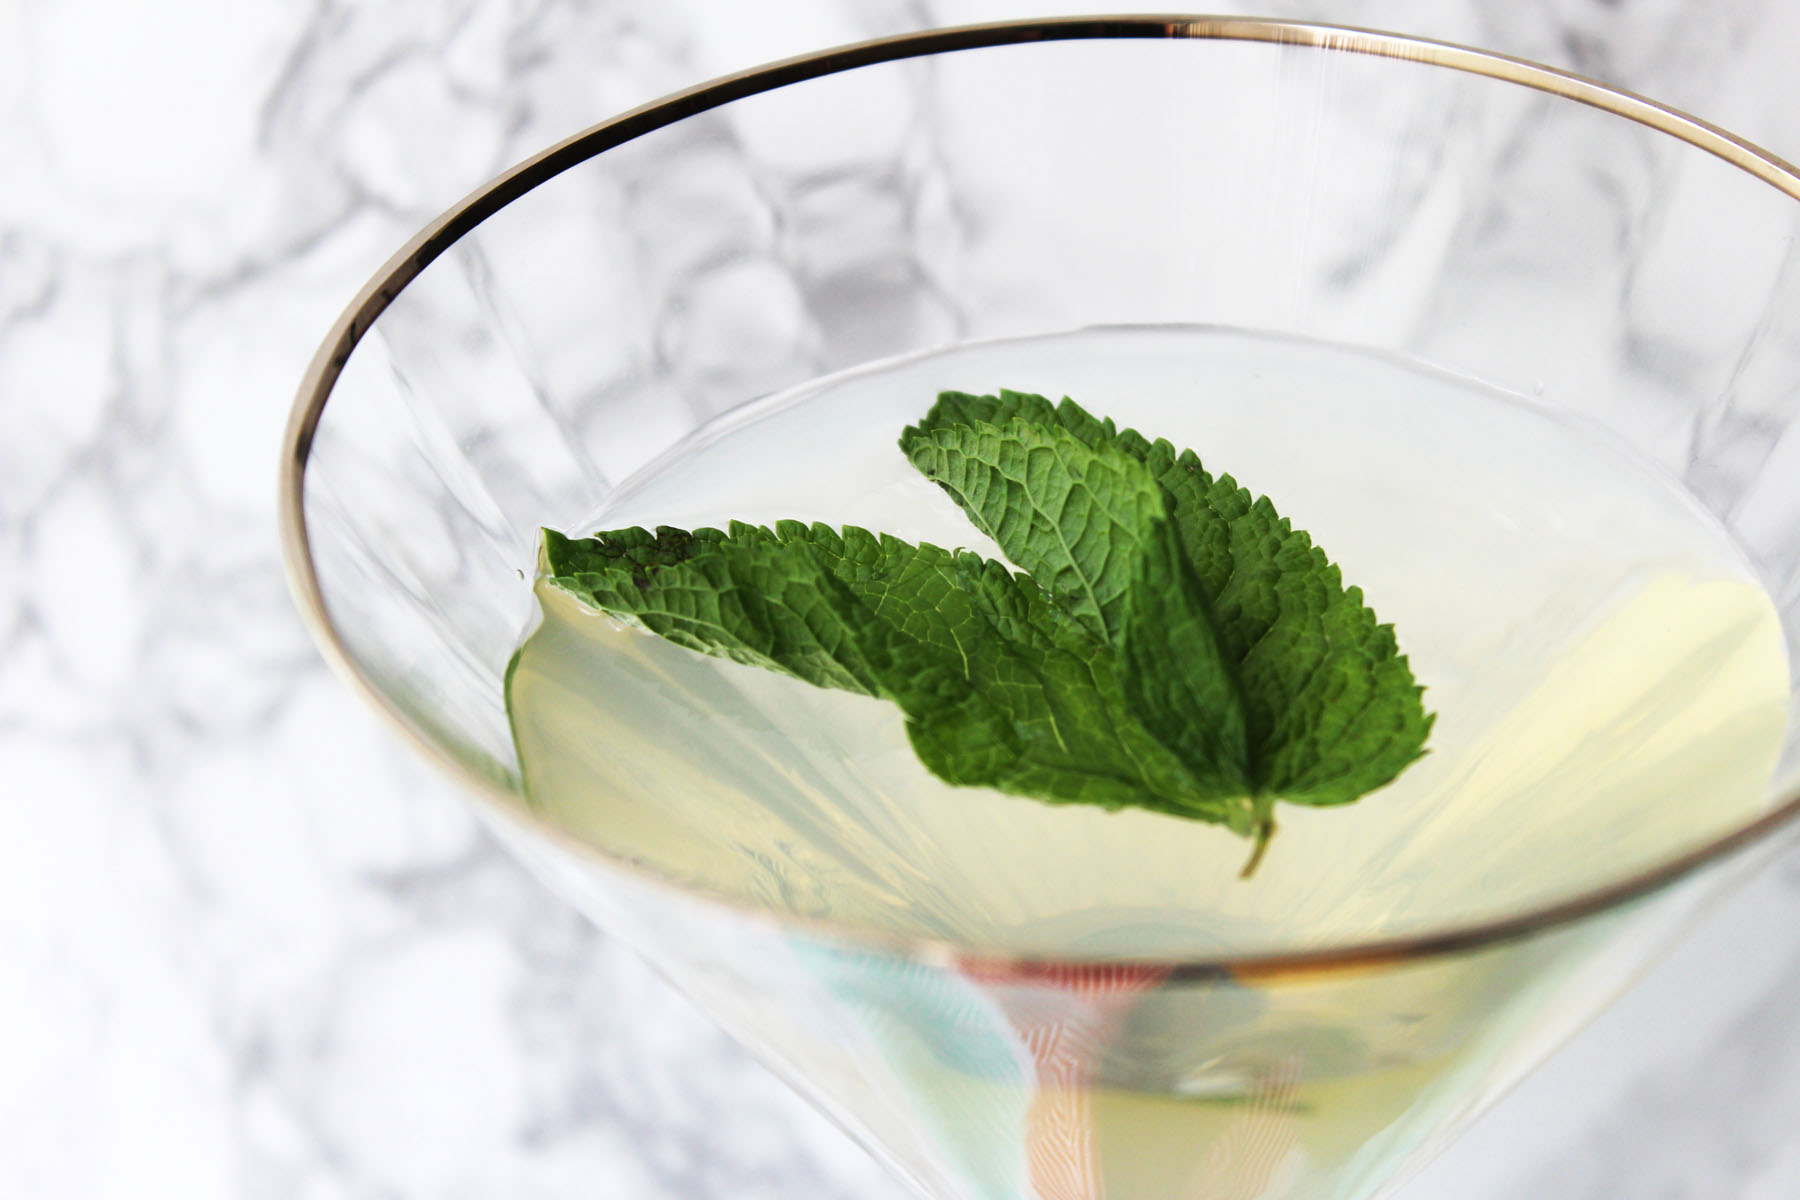 Check out the Soho Martini made with a cucumber mint and citrus fruit soft drink from the Soho Juice Co